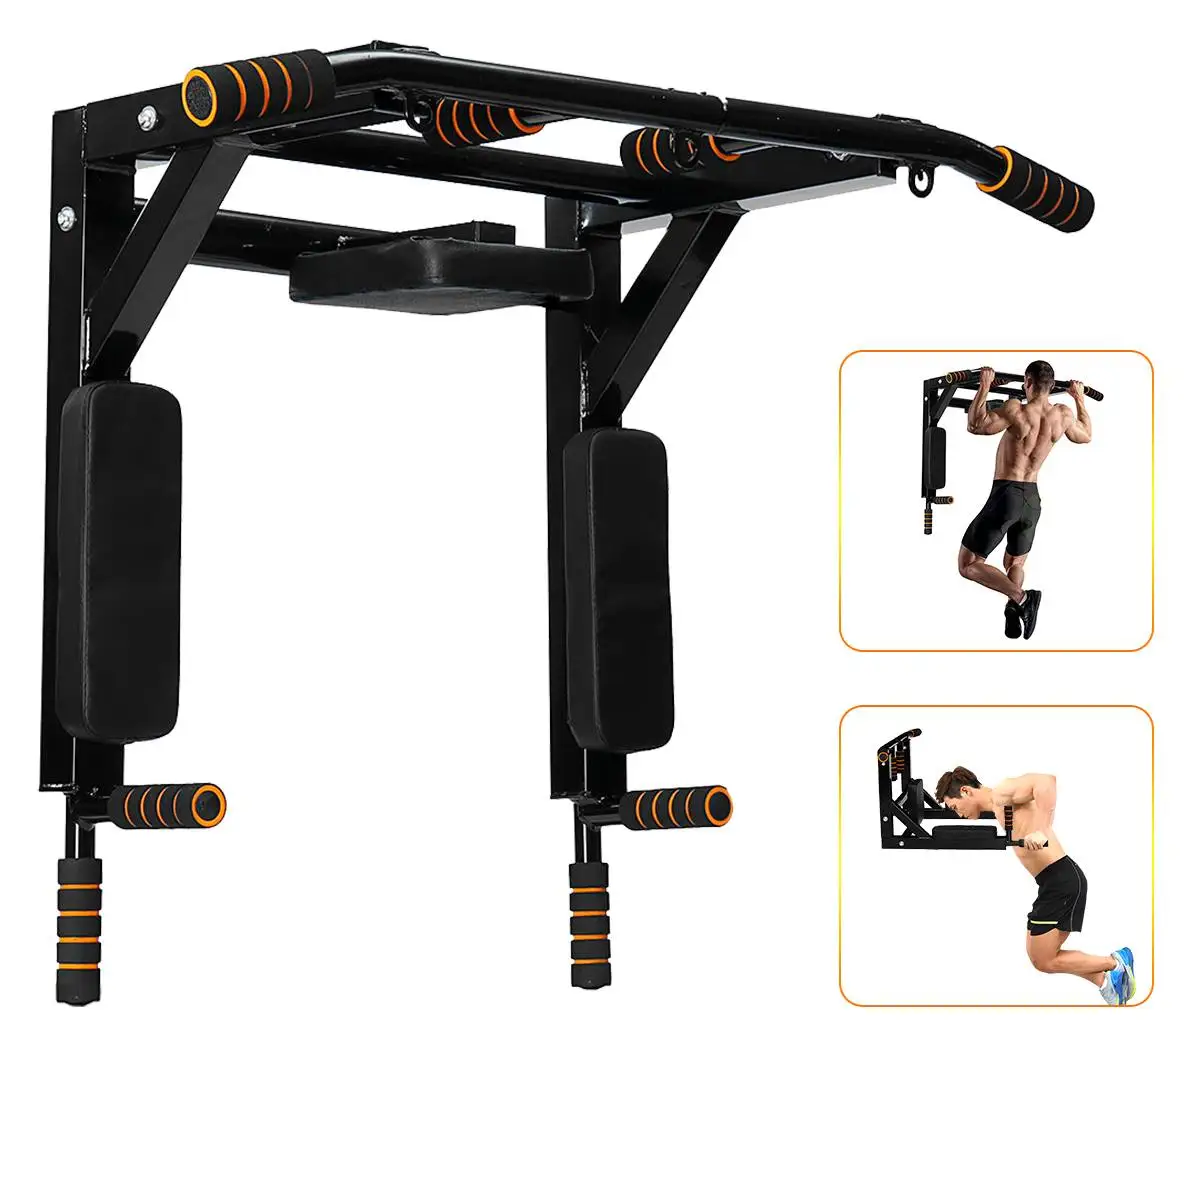 

Horizontal Bars Dip Station Wall Mounted Pull Up Bar Chin Up Bars Home Gym Workout Muscle Training Fitness Equipments Exerciser